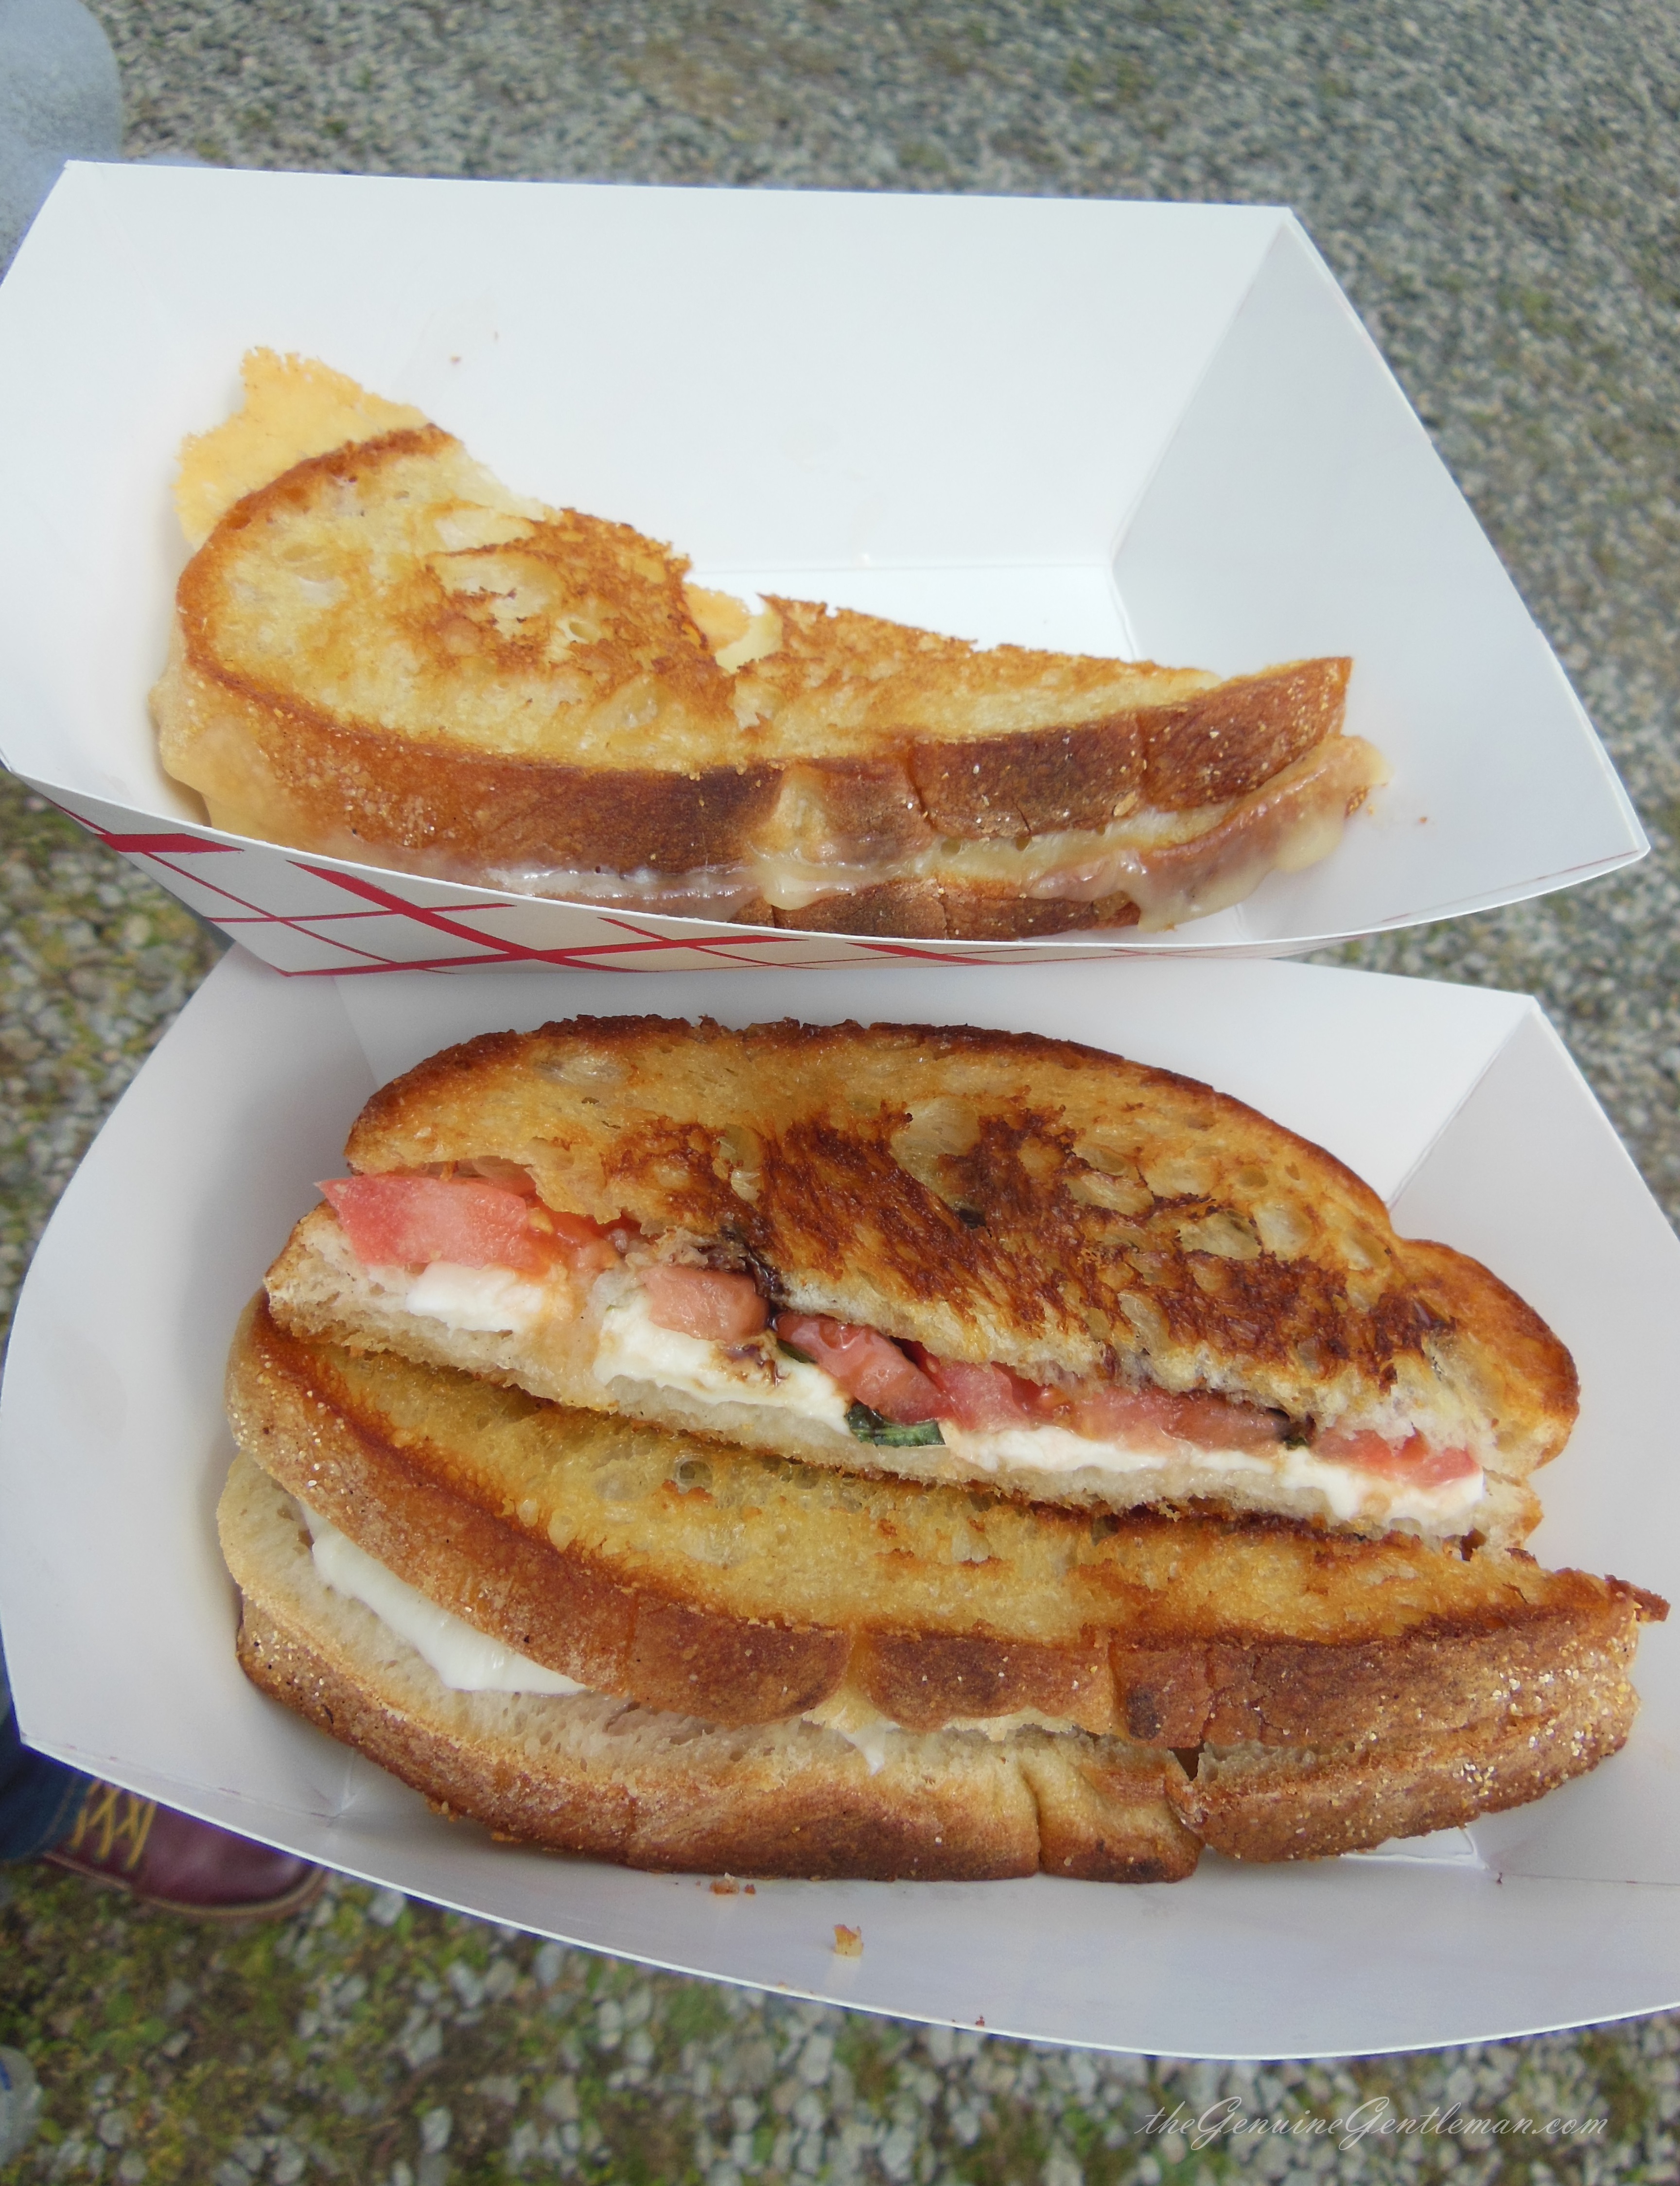 Brimfield Antique Show grilled cheese lunch